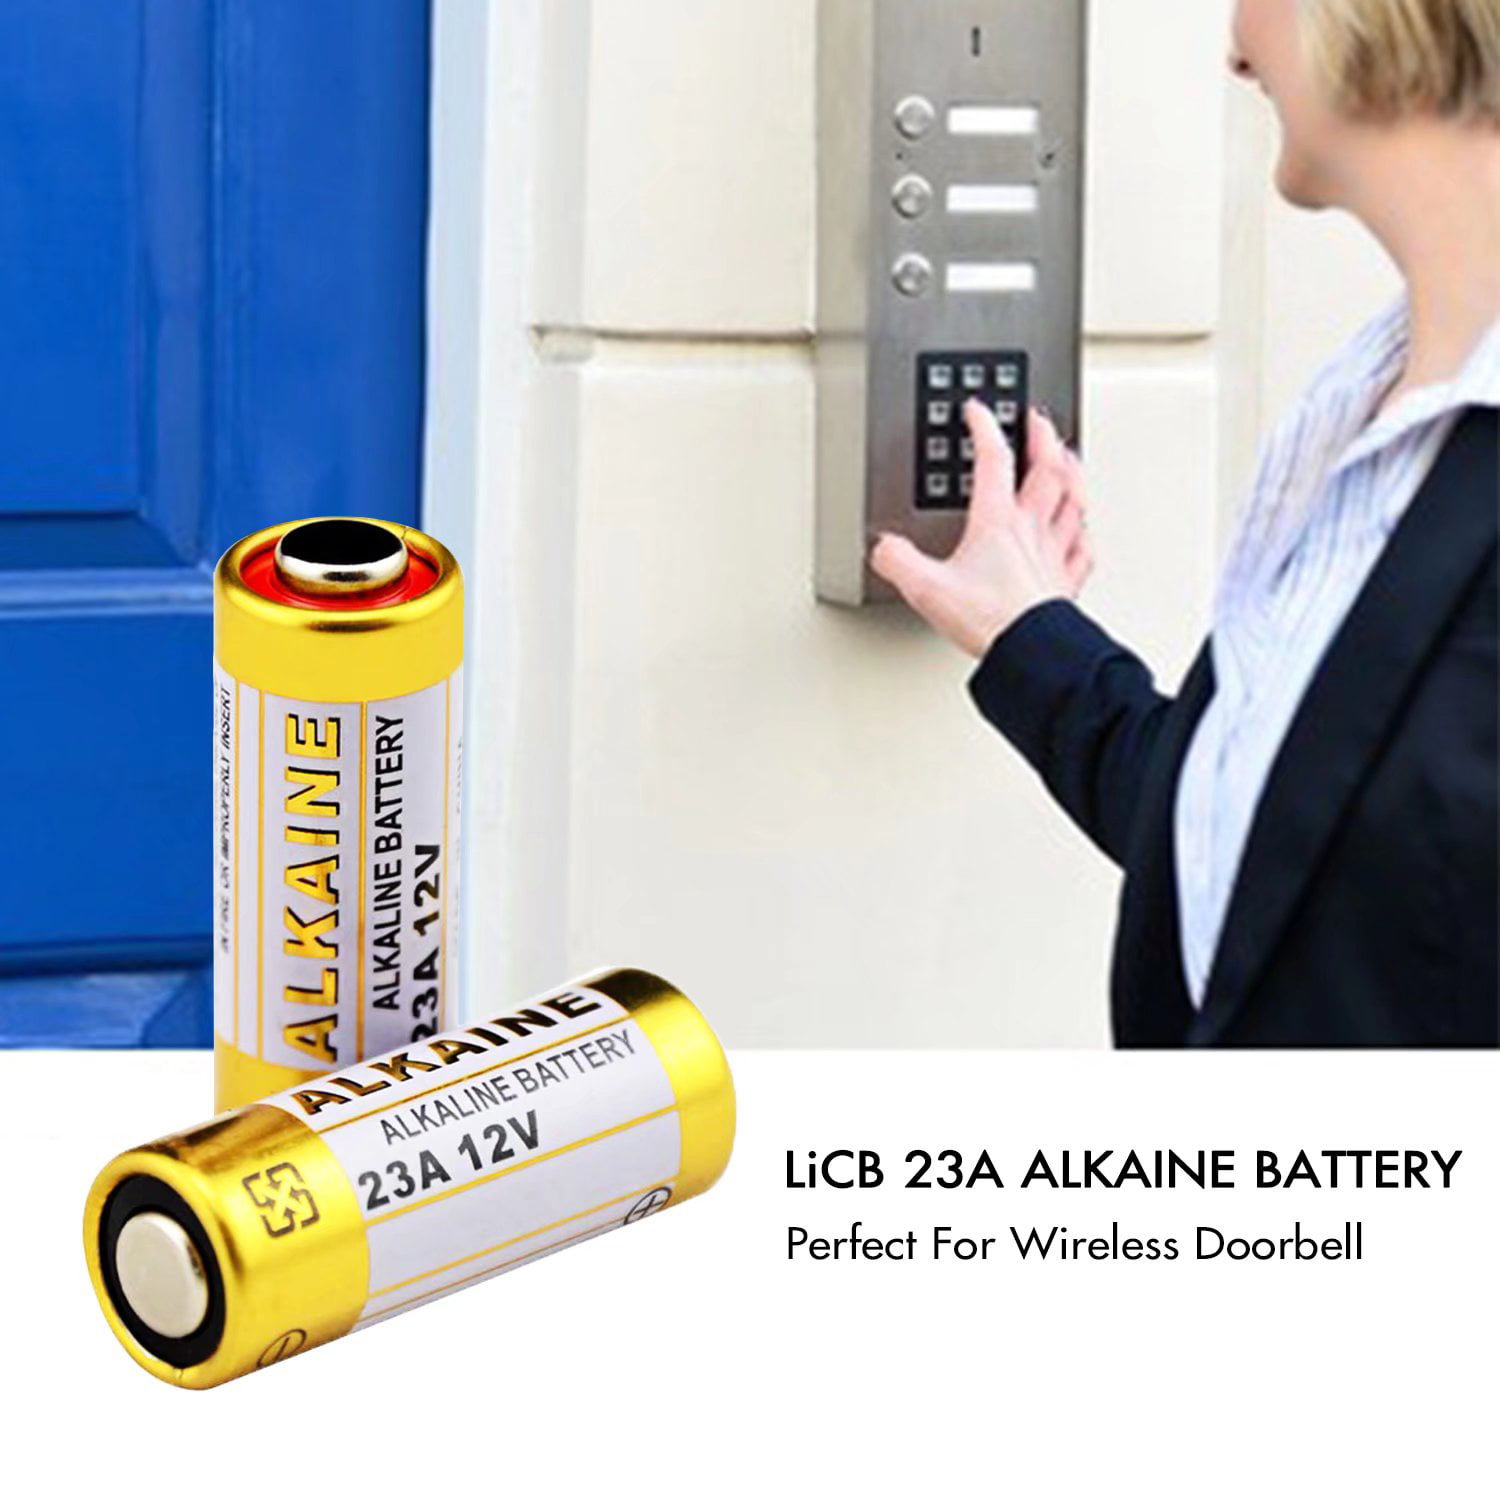  LiCB A23 23A 12V Alkaline Battery (5-Pack) : Health & Household